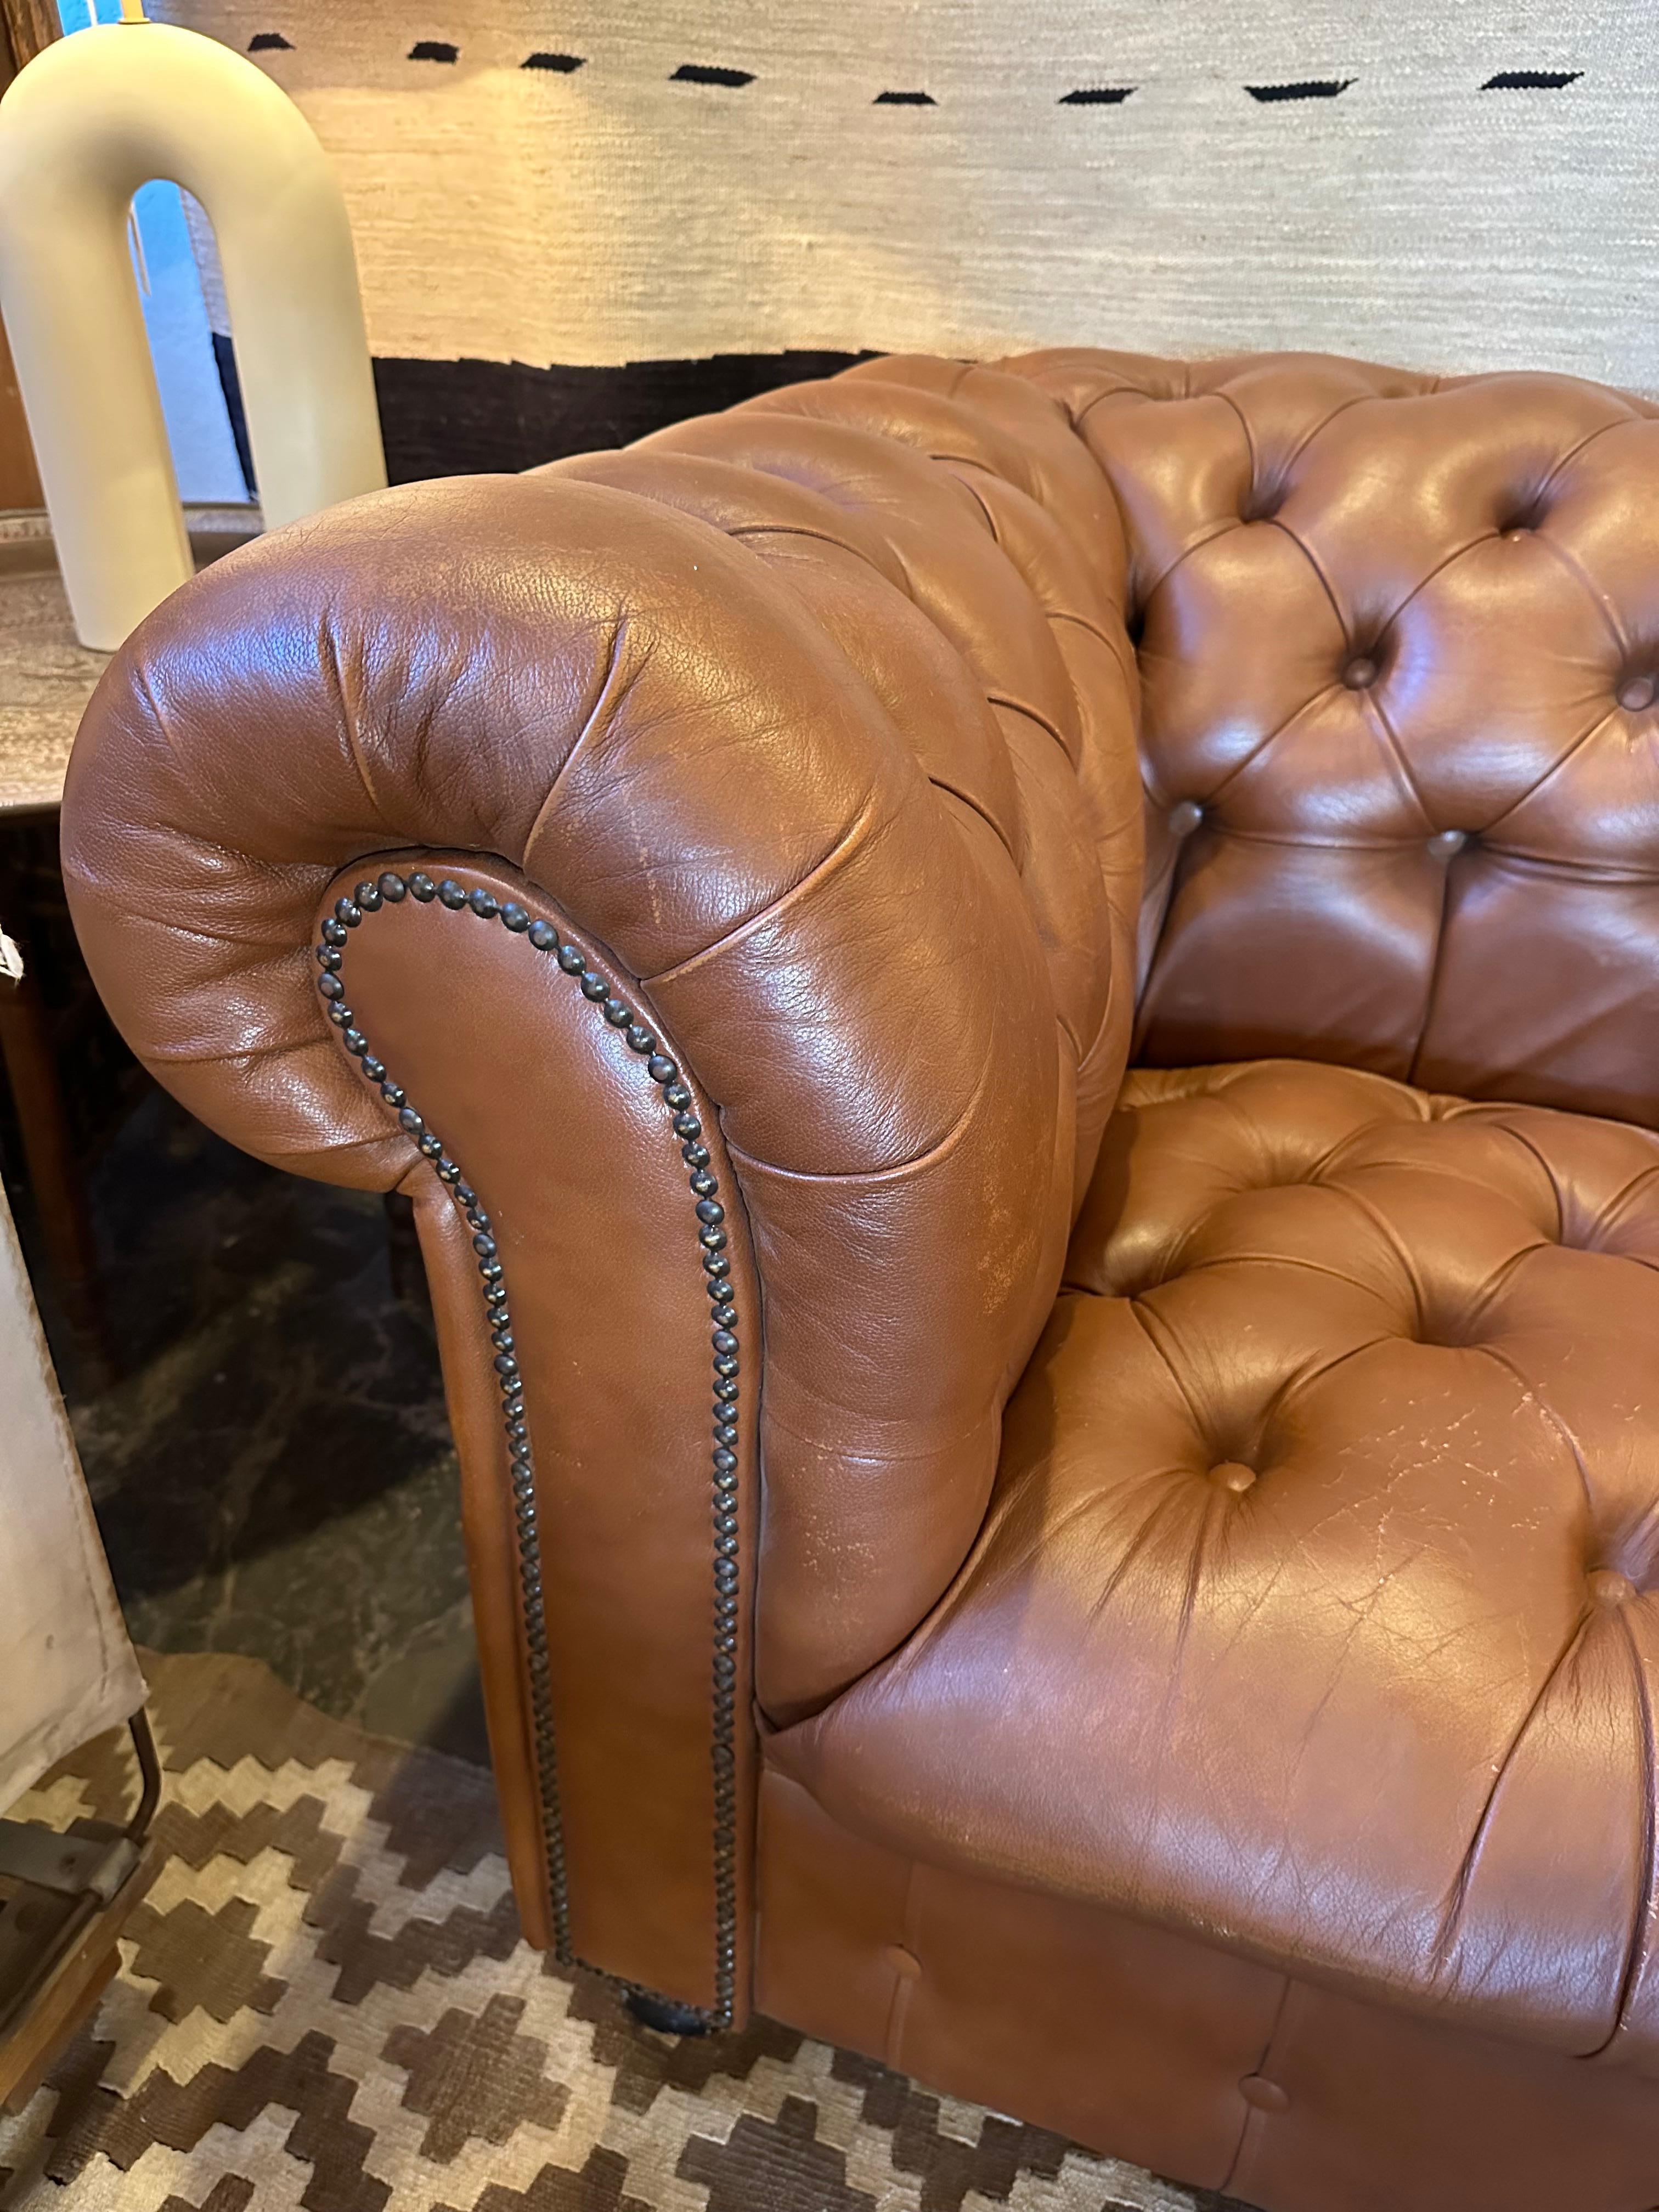 This vintage three seater Chesterfield stands as a timeless design staple, characterized by tufted leather upholstery and rolled arms. The leather, while softly aged, remains in good condition. Notably, it features the Empire Furniture Company